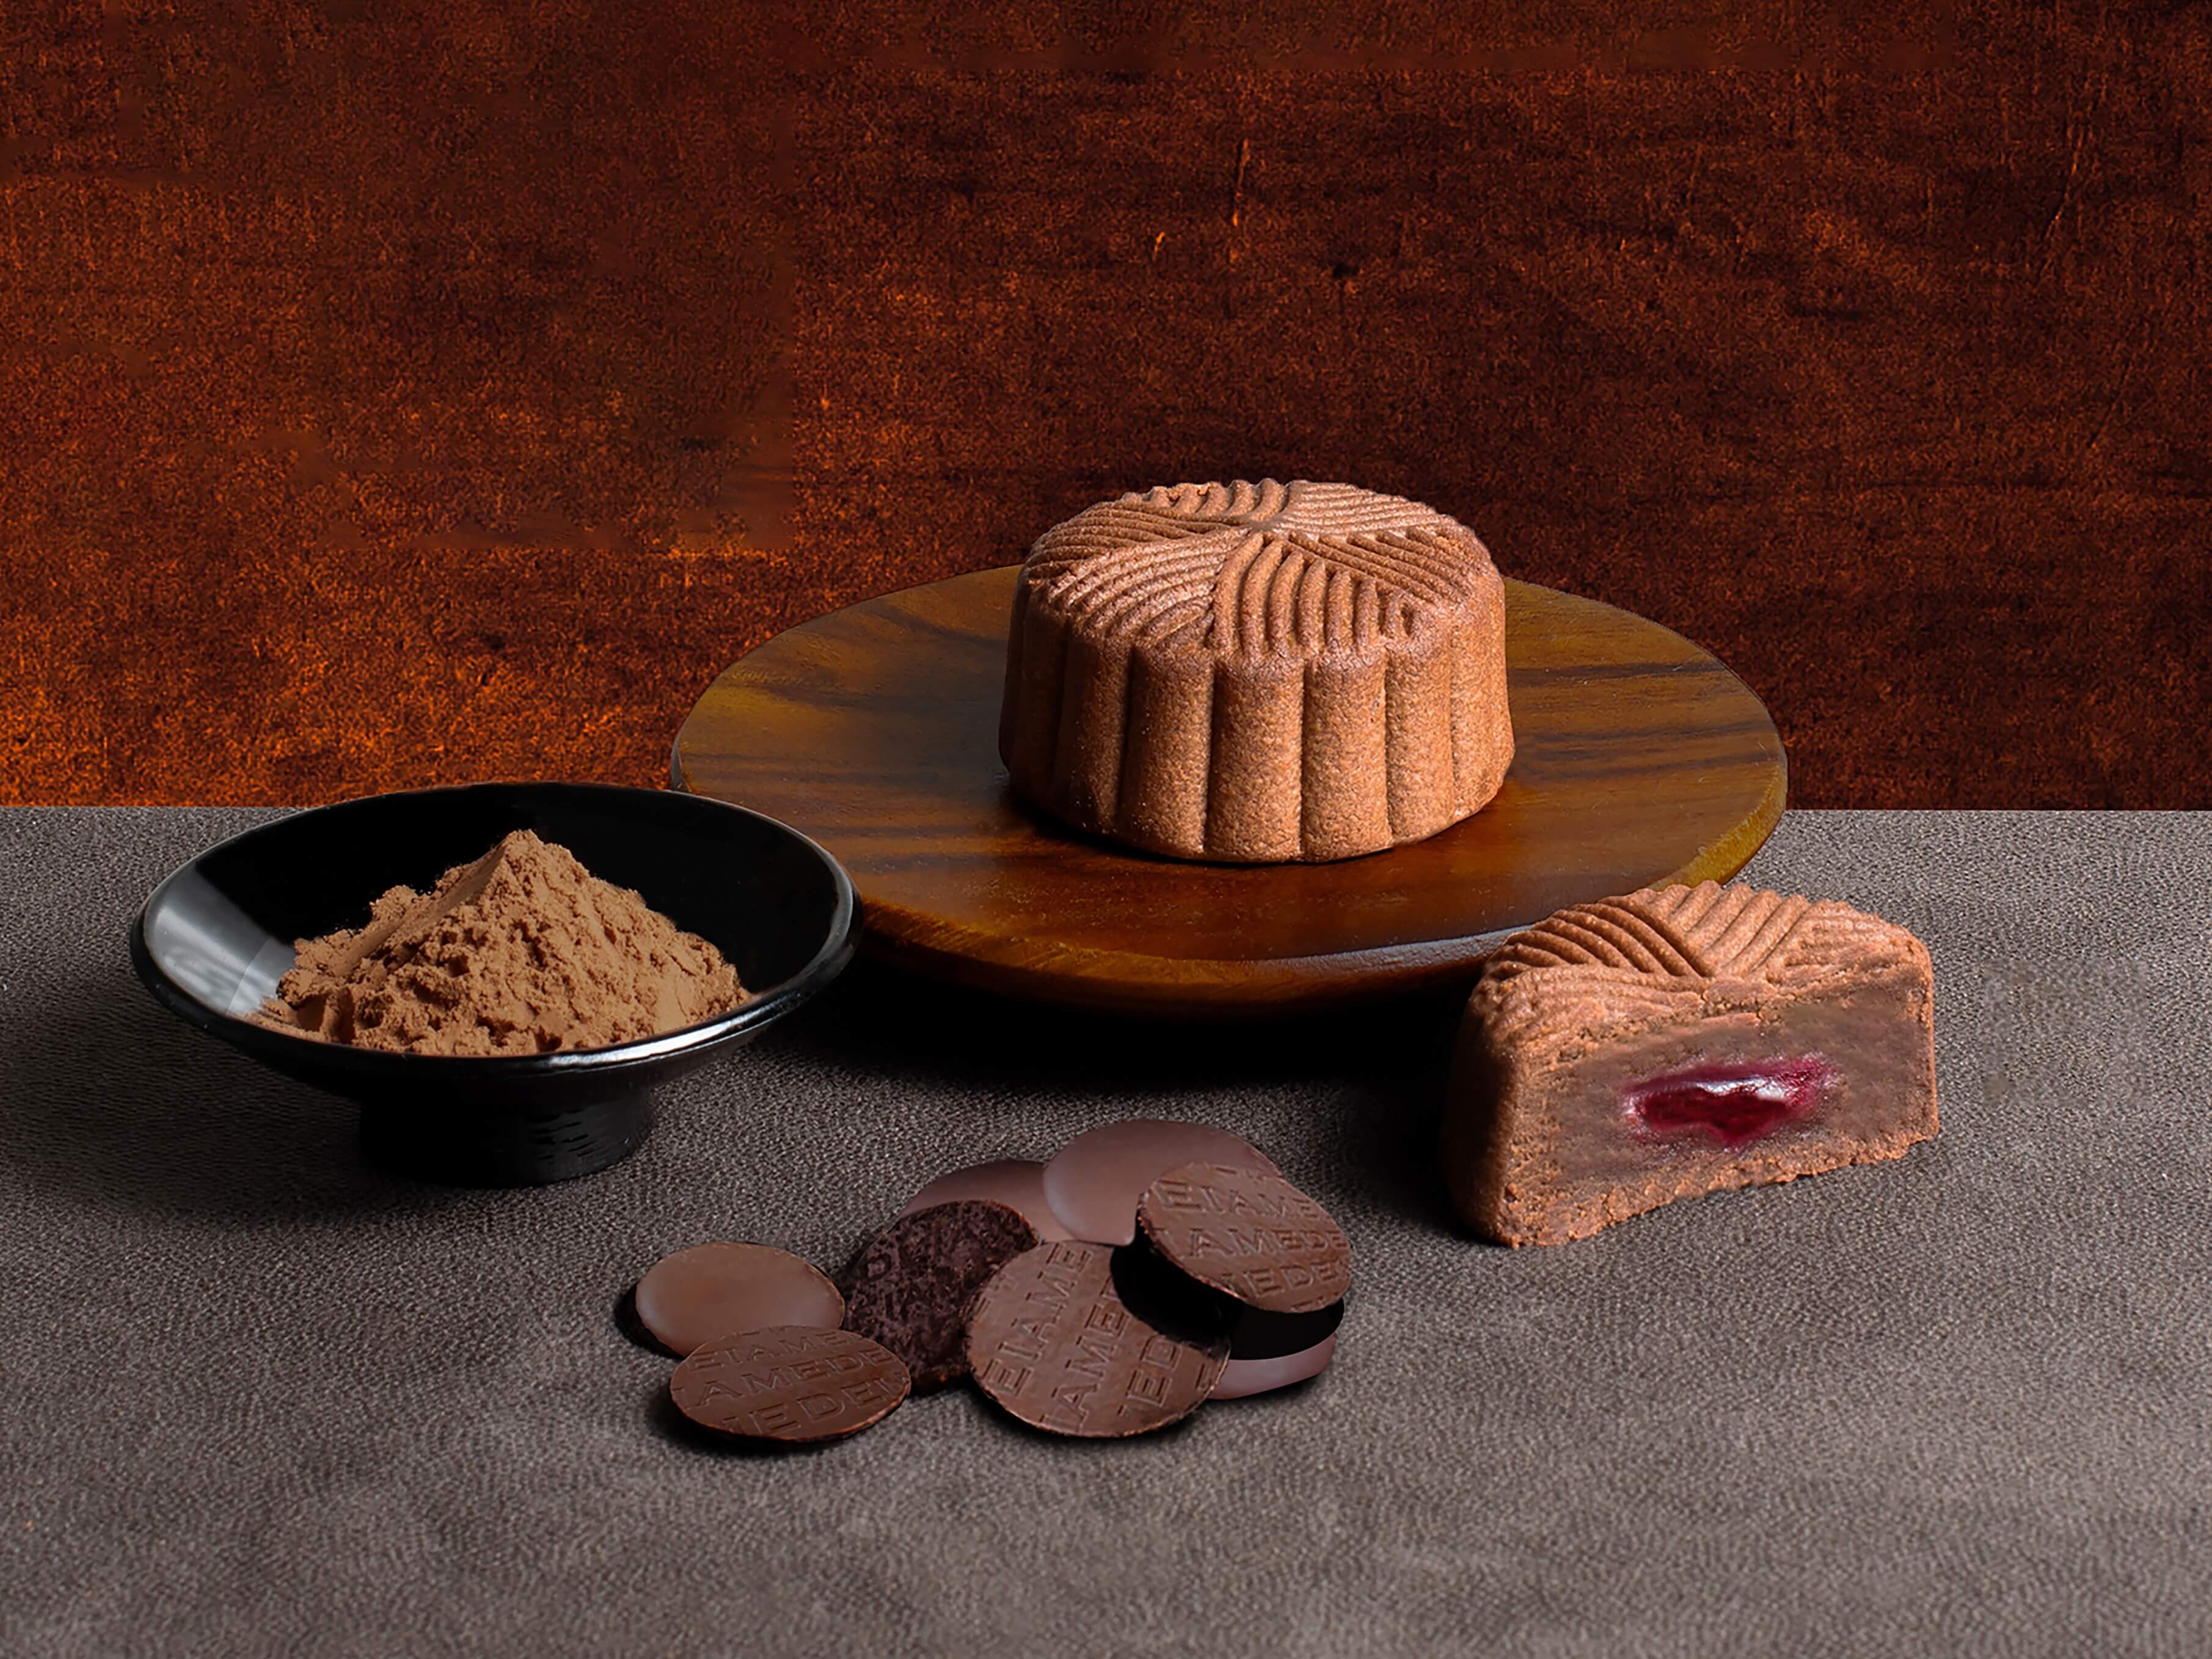 Kee Wah Bakery's 2023 Limited Edition Mid-Autumn Mooncakes—AMEDEI Assorted Chocolate Mooncake Gift Box 